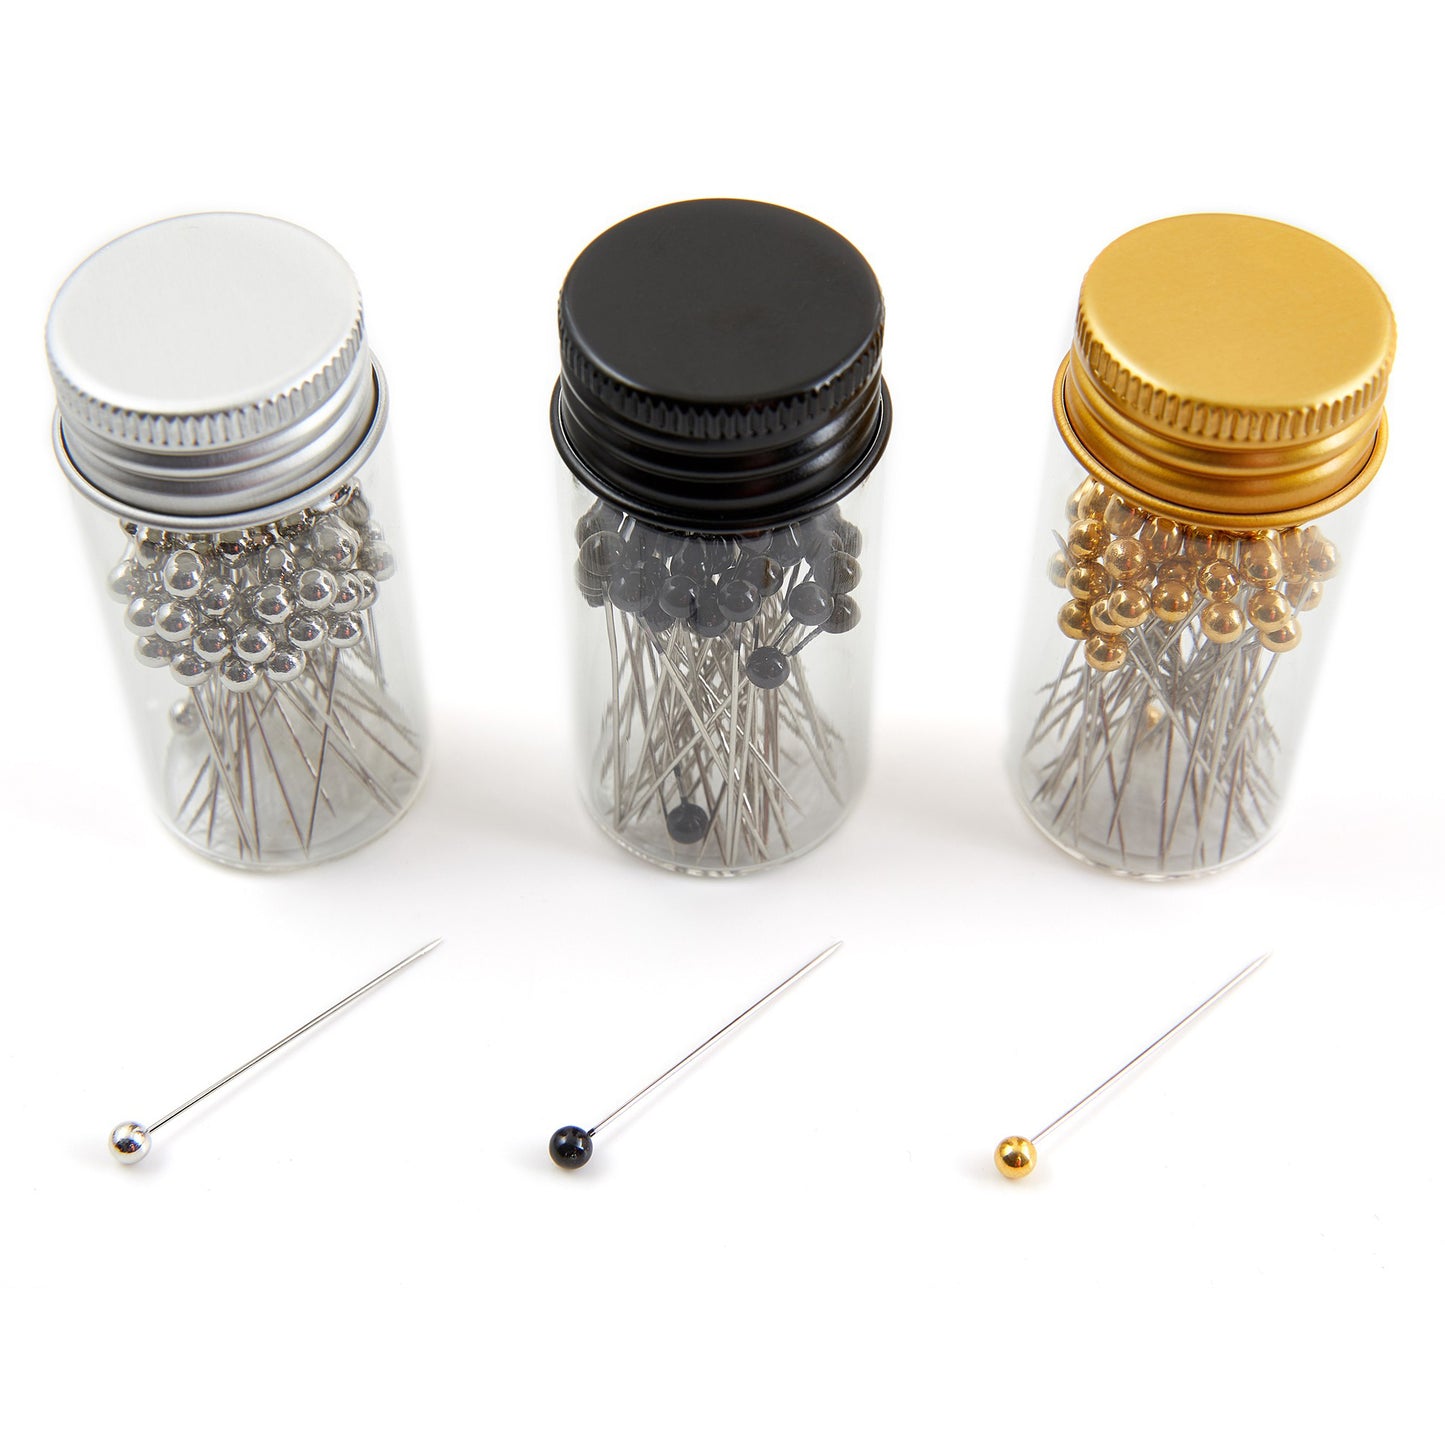 Plastic Head Pins in Glass Jars: Gold, Silver or Black: 18 Pieces